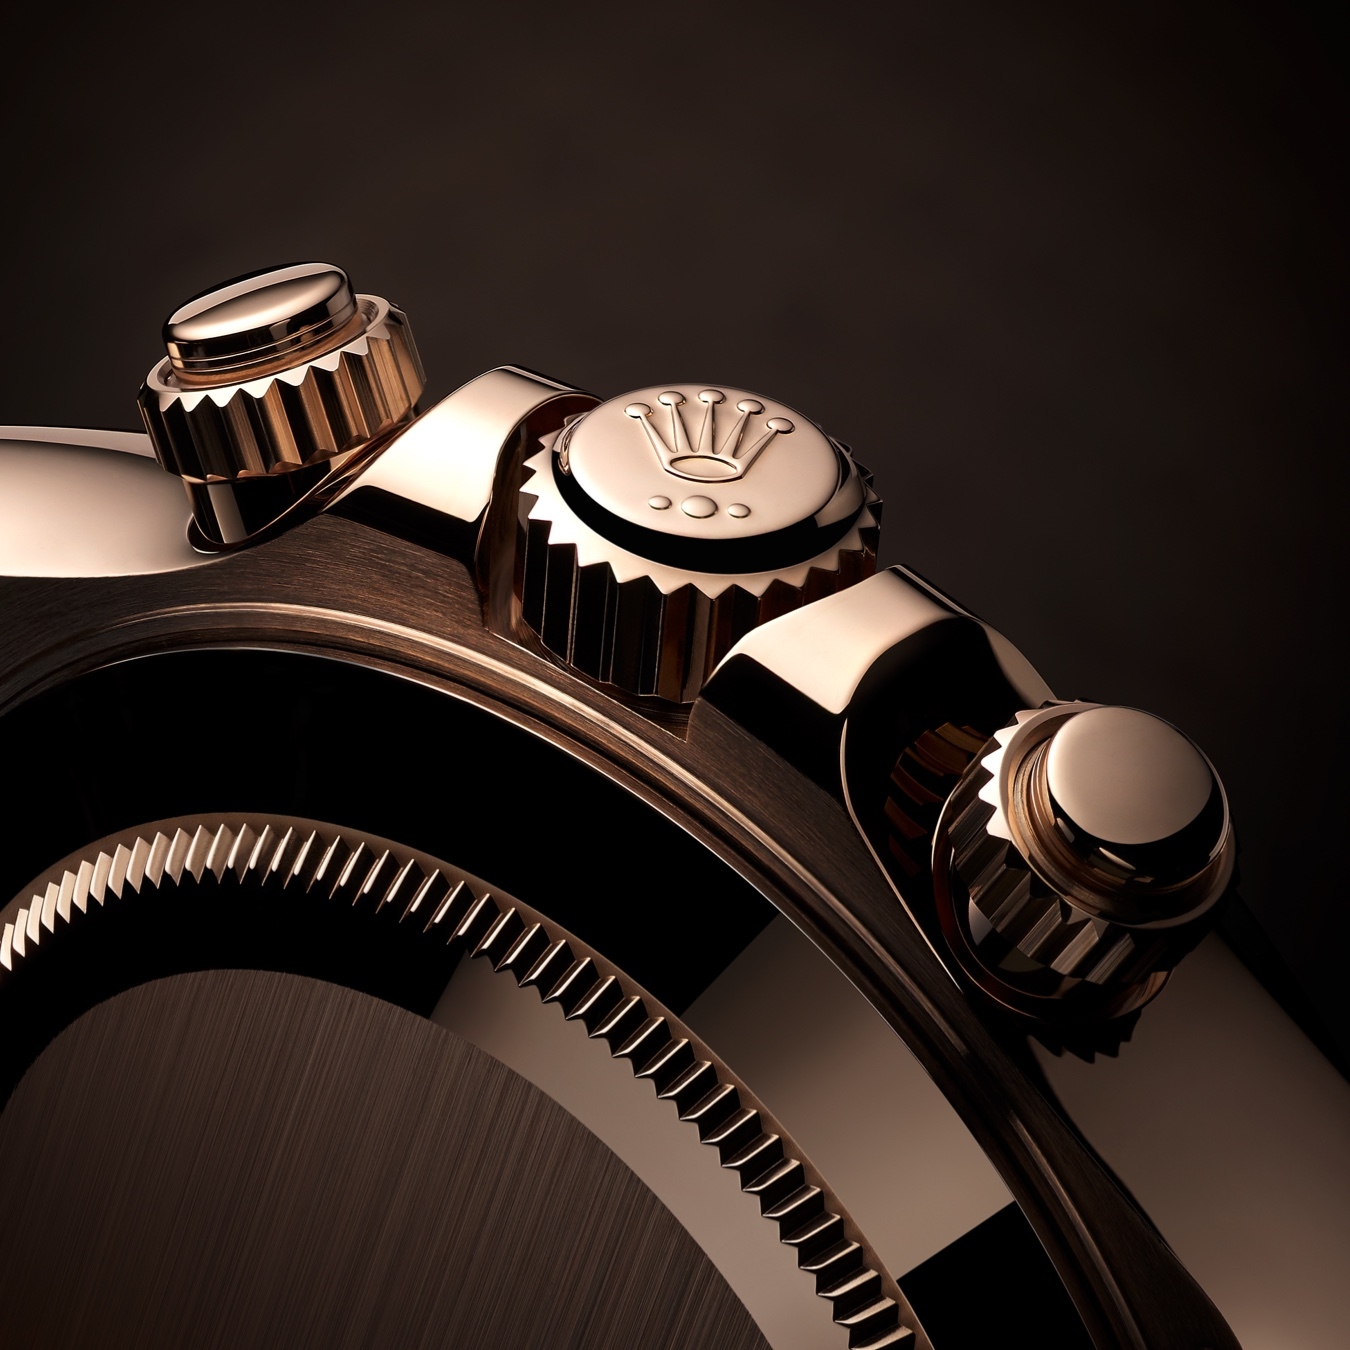 Rolex's pusher and crown